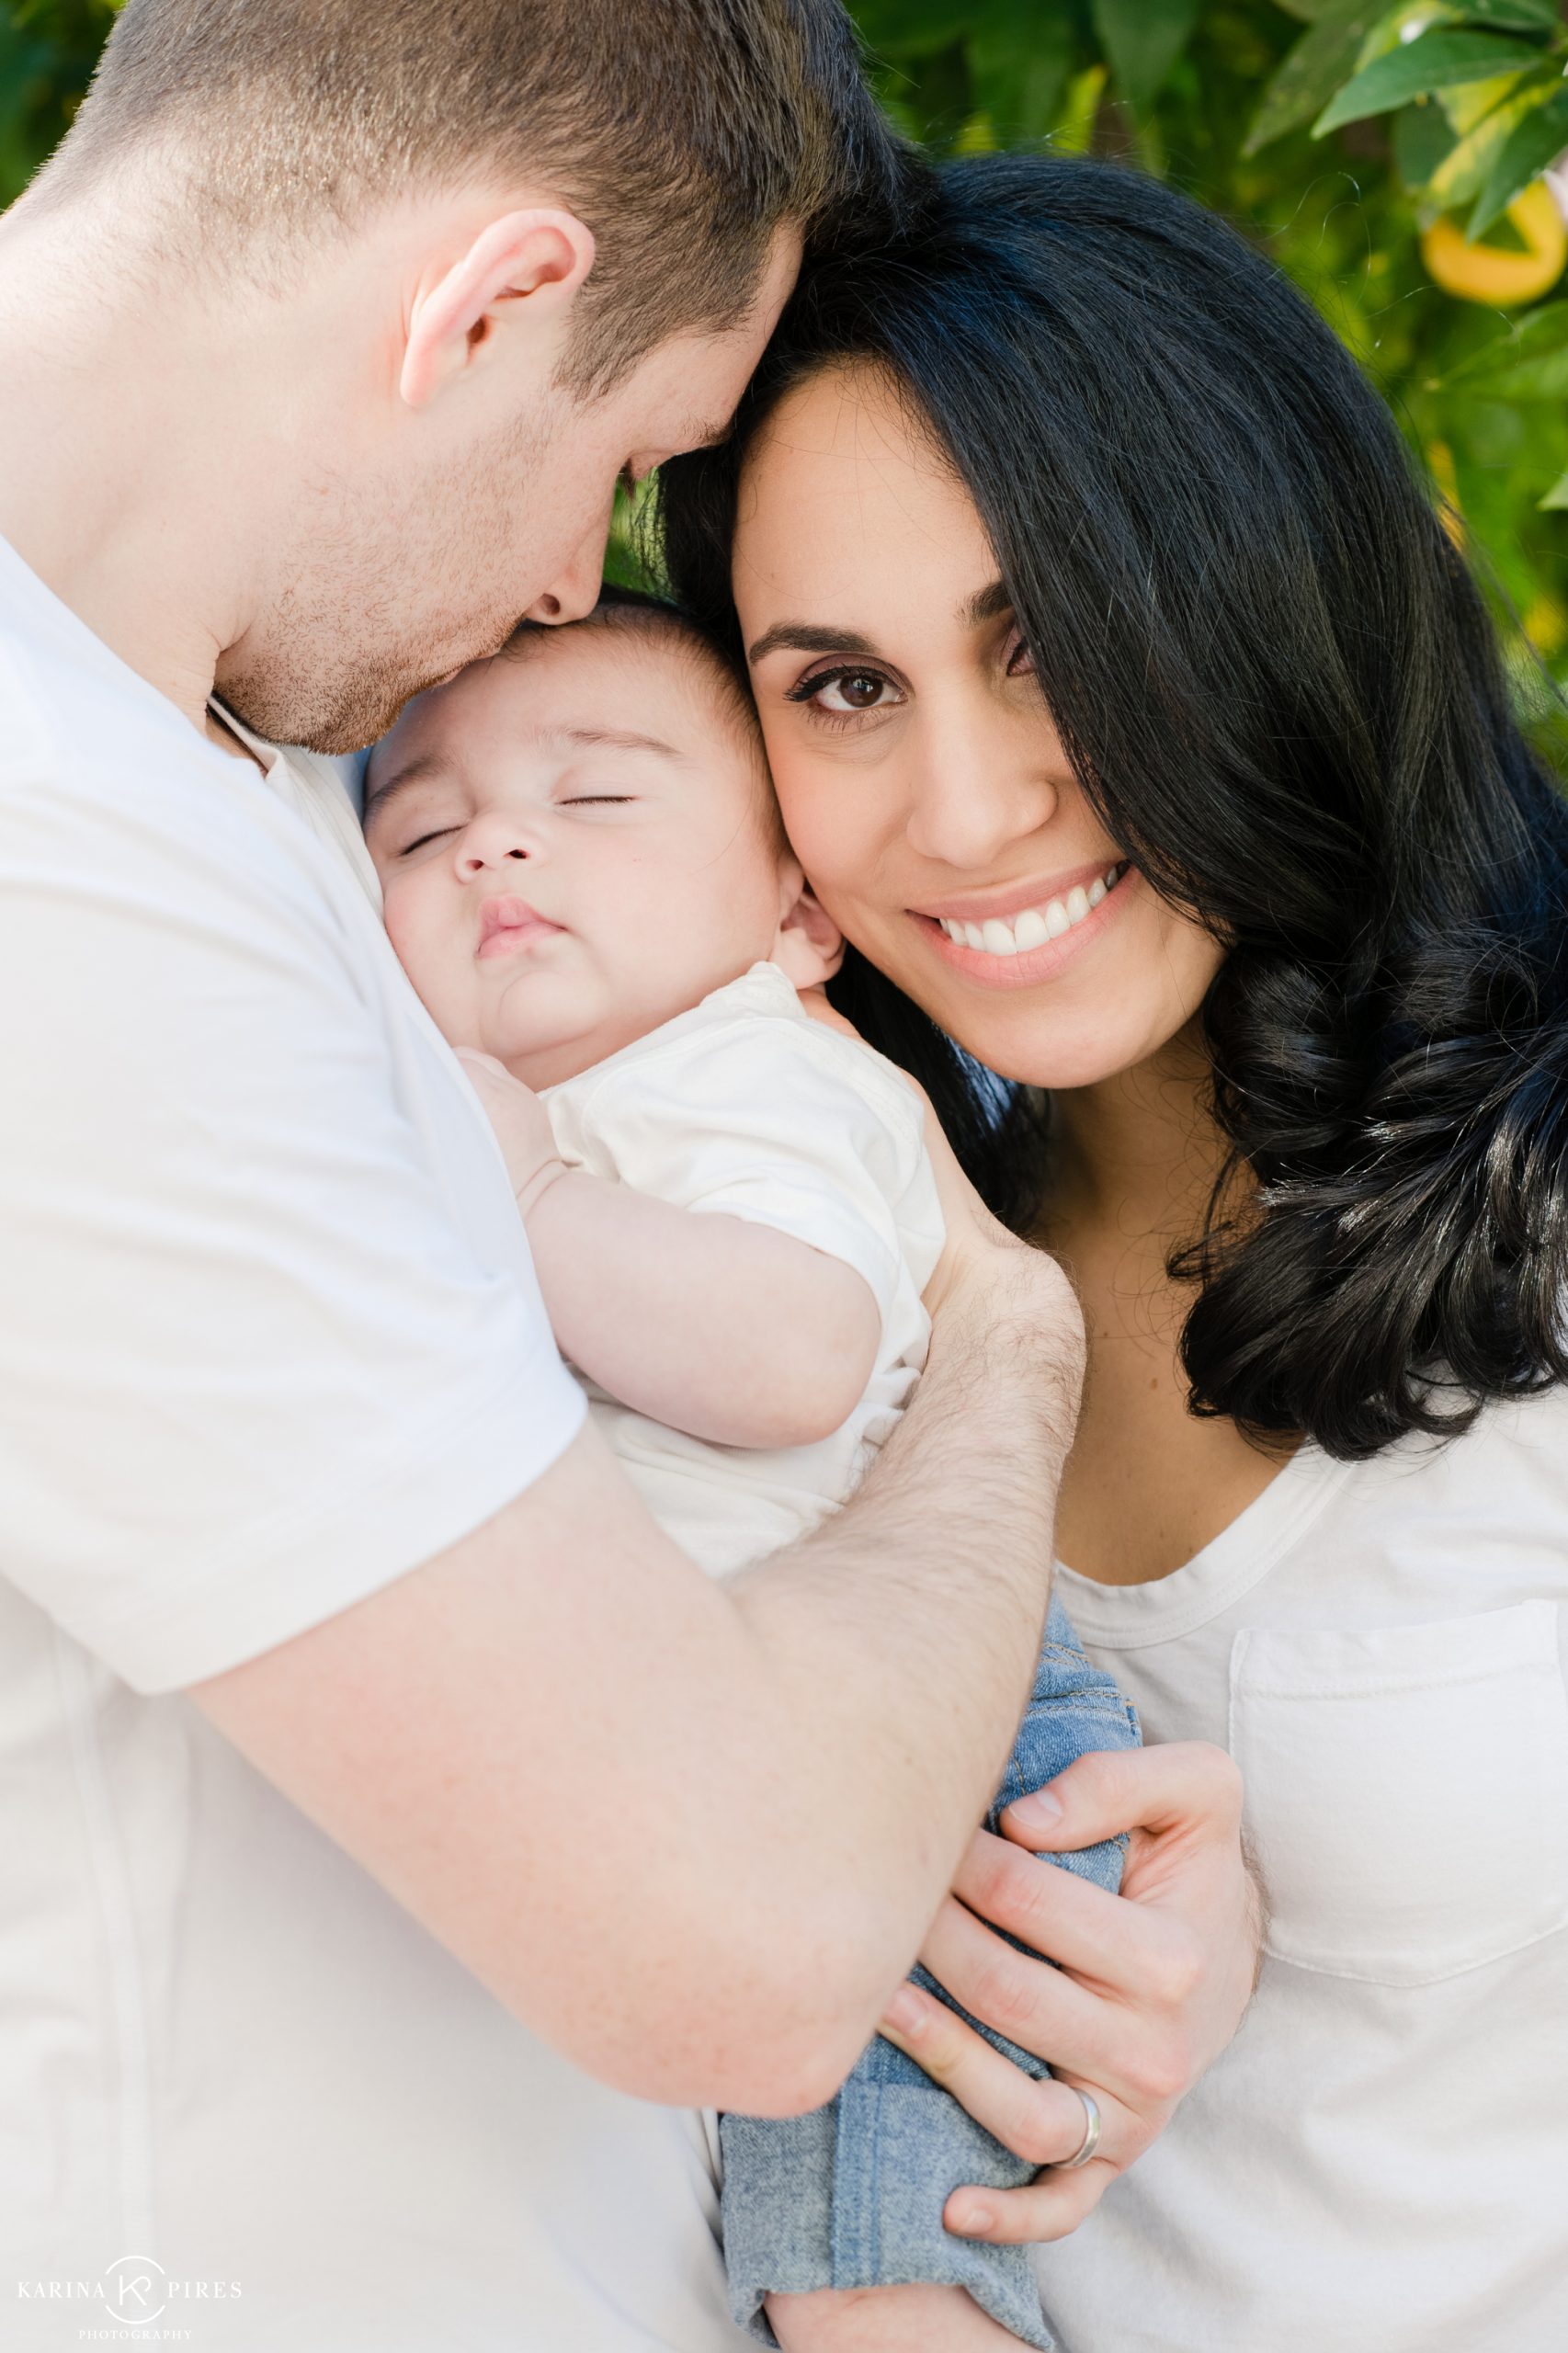 The Loewy Family’s Newborn Session